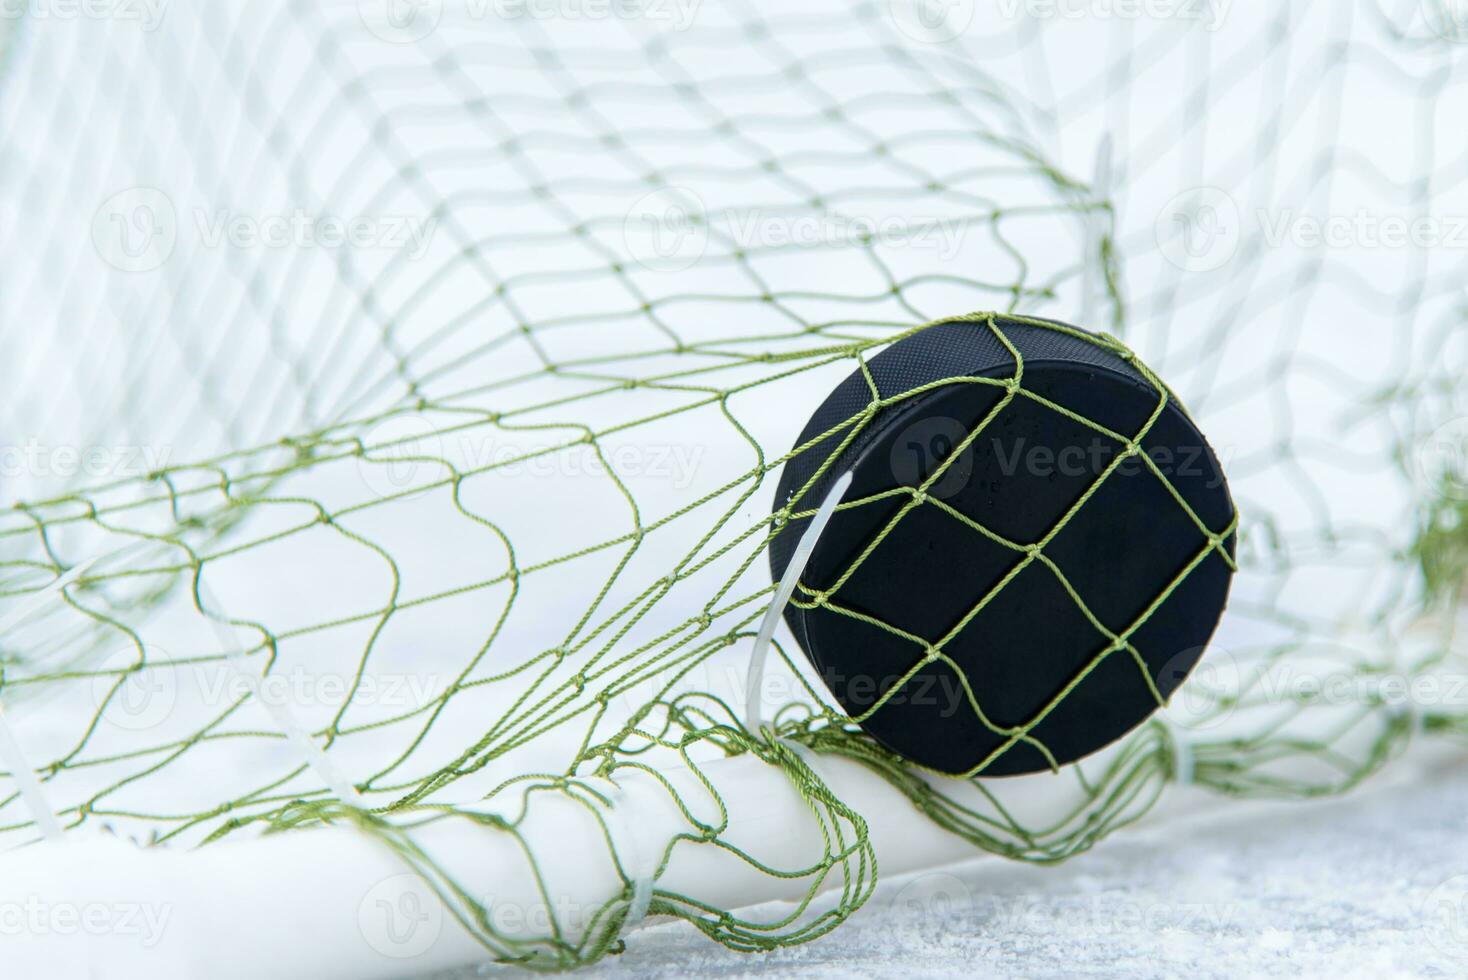 goal scored by a hockey puck in the goal net photo